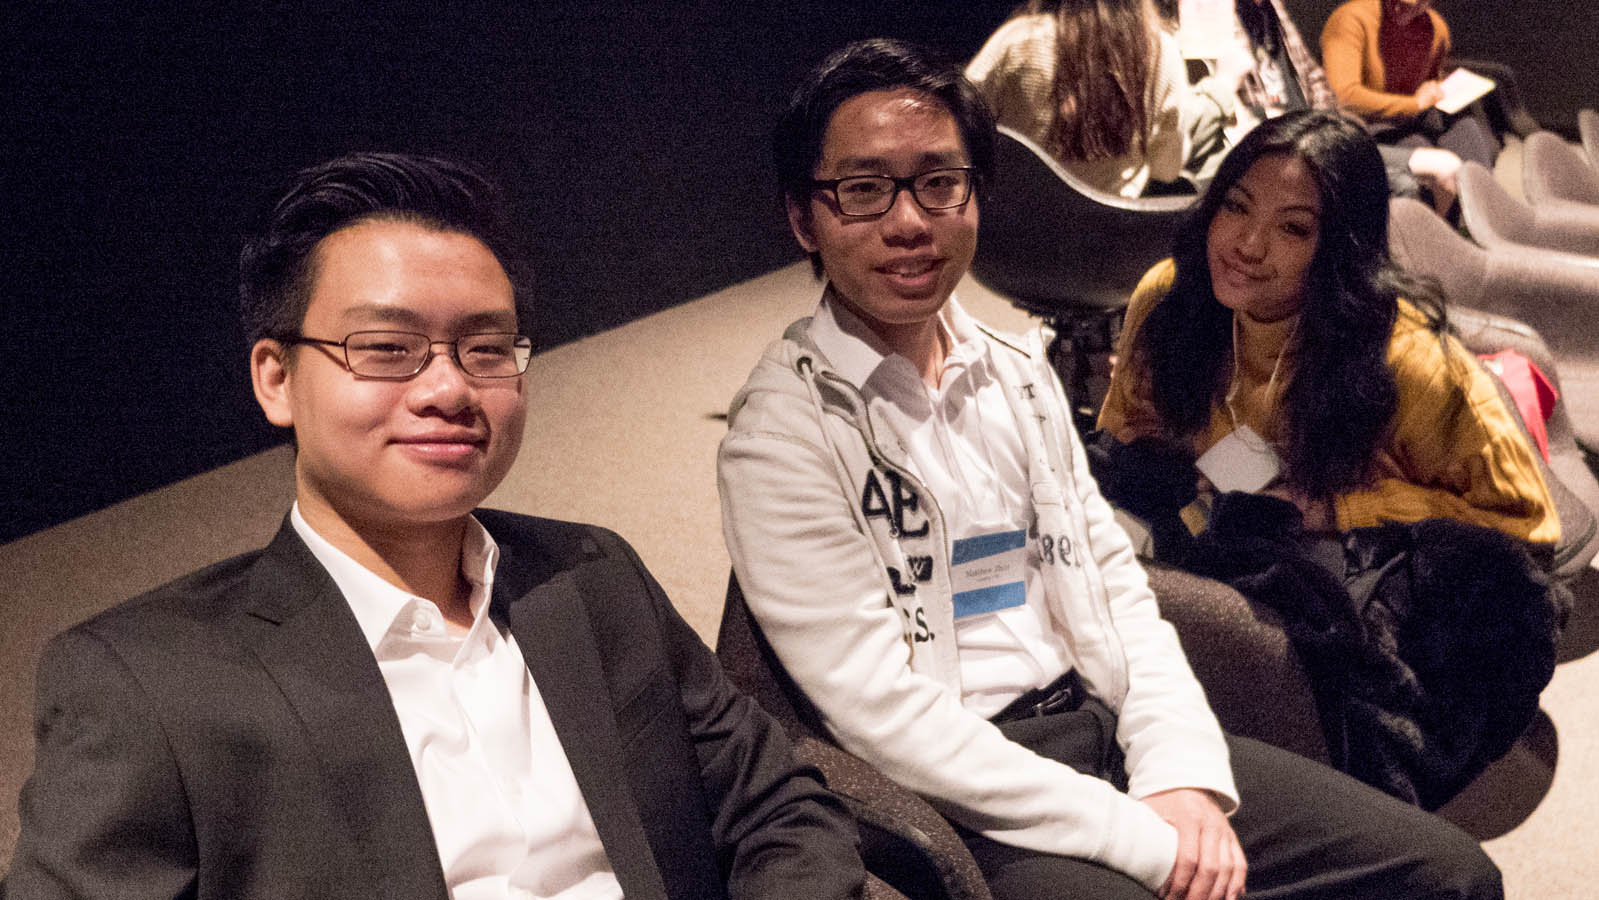 English Stream Semifinalists William Zhang, Matthew Zhou, and Cyrena Fiel are ready to cheer on their fellow Semifinalists in the French Stream.